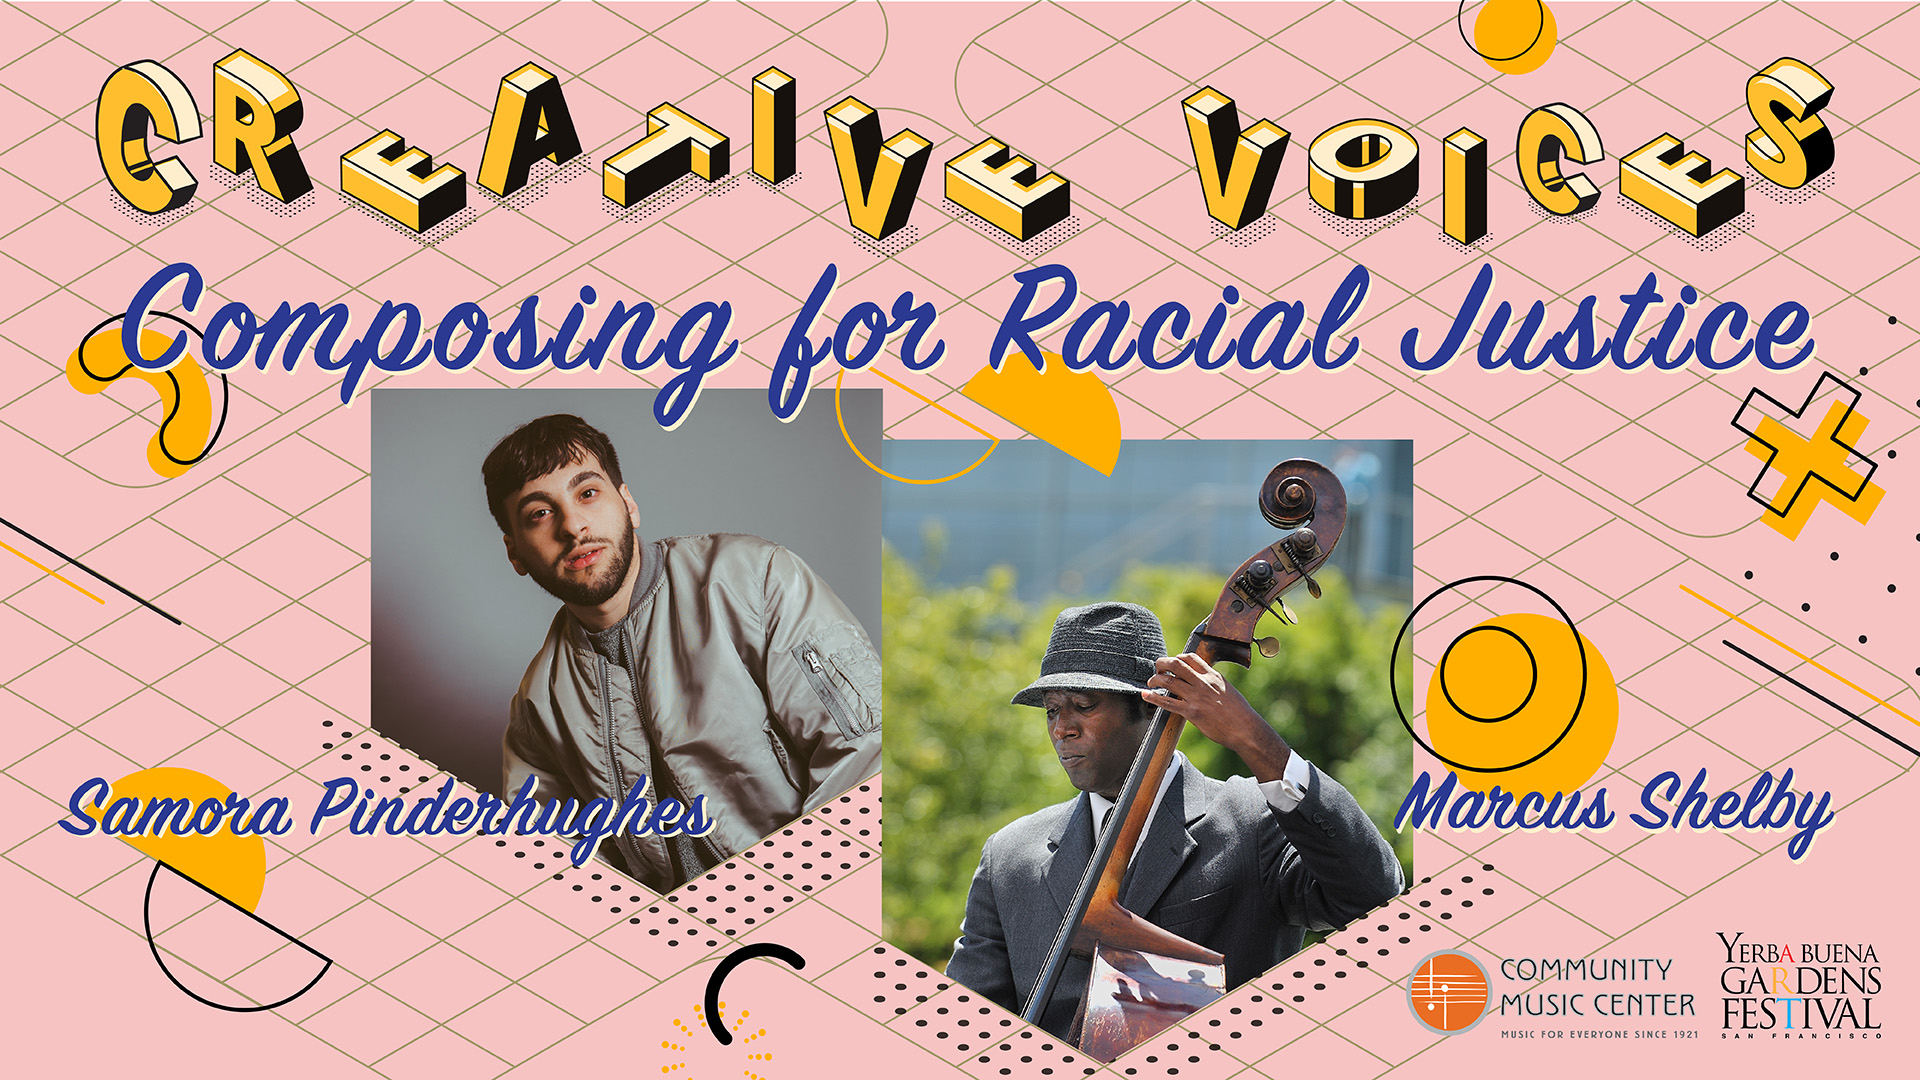 Creative Voices graphic featuring two photos. One photo with Samora Pinderhughes looking outward, wearing a light grey sweater in front of a grey backdrop. The other photo shows Marcus Shelby wearing a charcoal fedora hat and suit, playing the upright bass outdoors in the daytime.